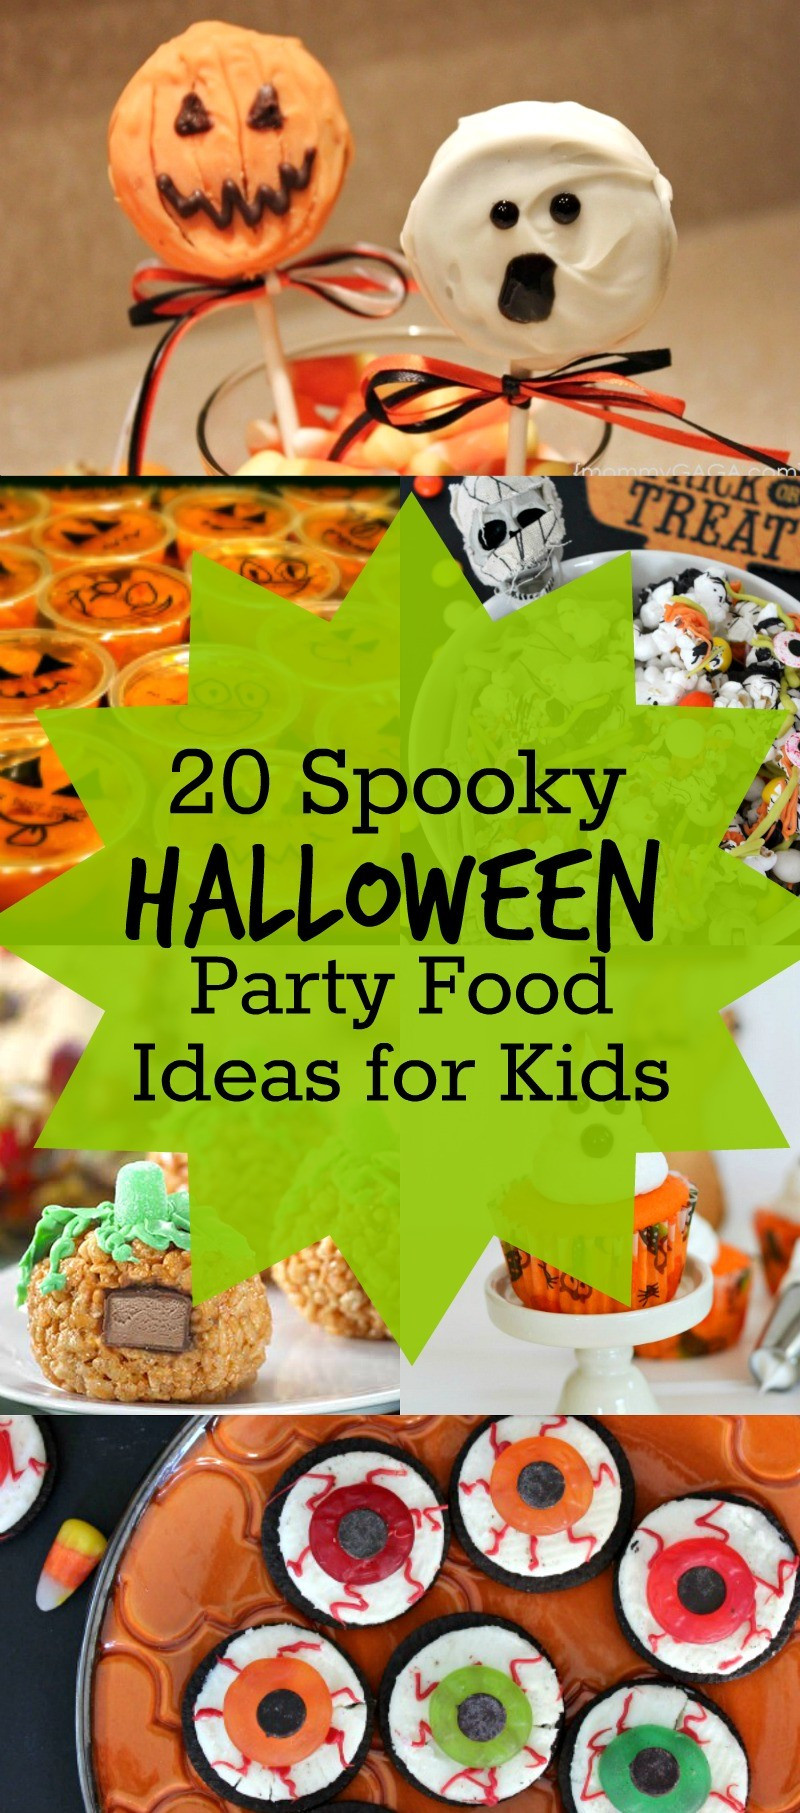 Childrens Halloween Party Food Ideas
 20 Spooky Halloween Party Food Ideas for Kids Such cute